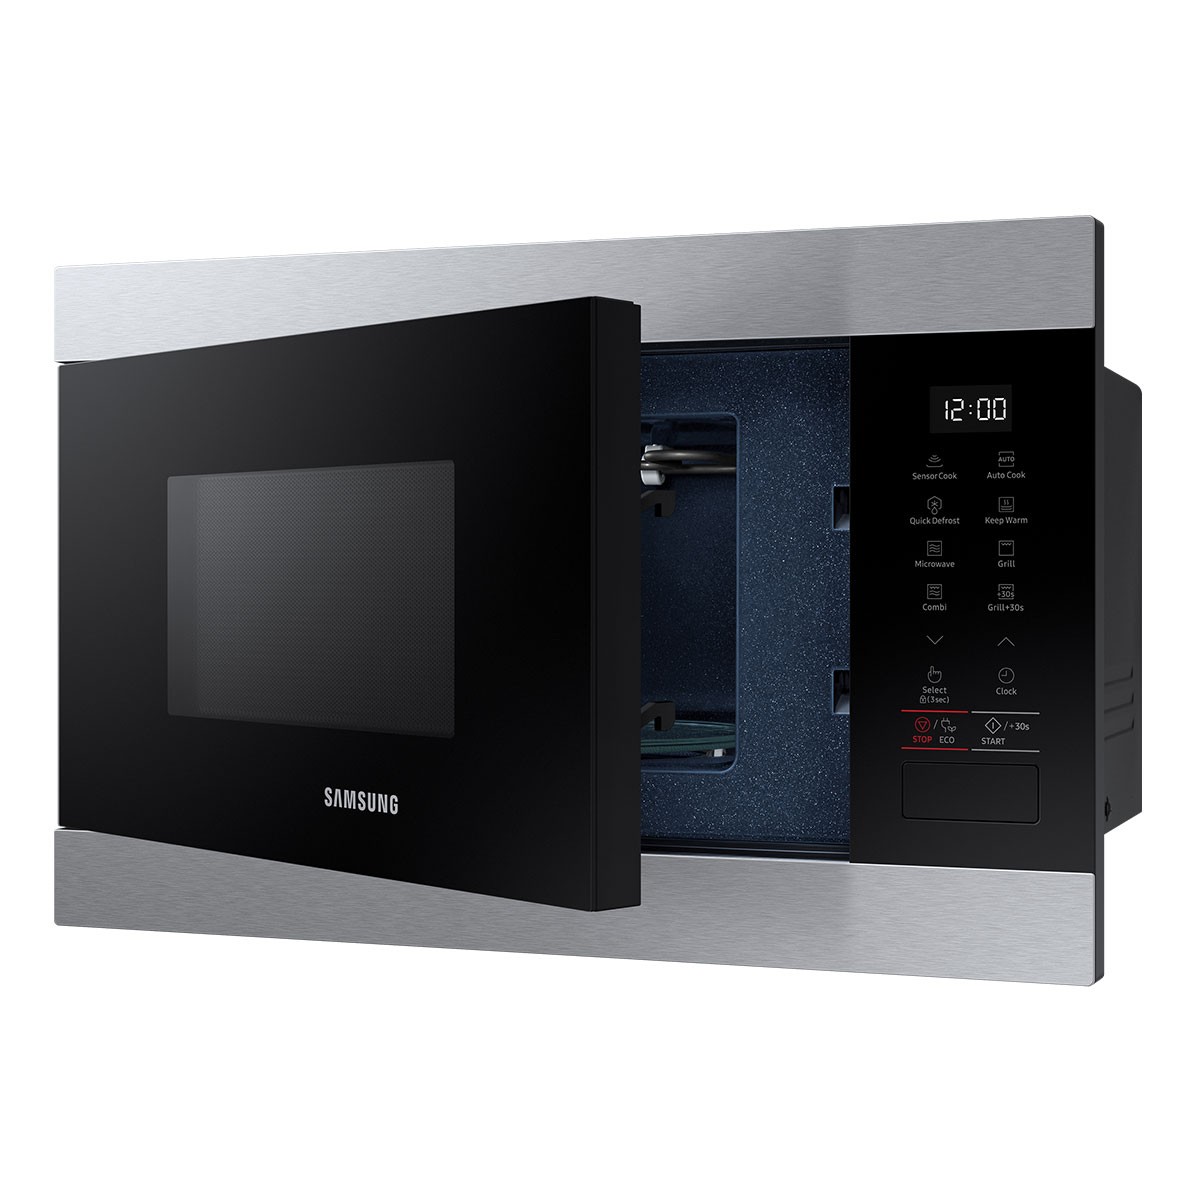 Samsung Built-in Microwave 850W 22L Stainless Steel (MG22M8274CT/E1)